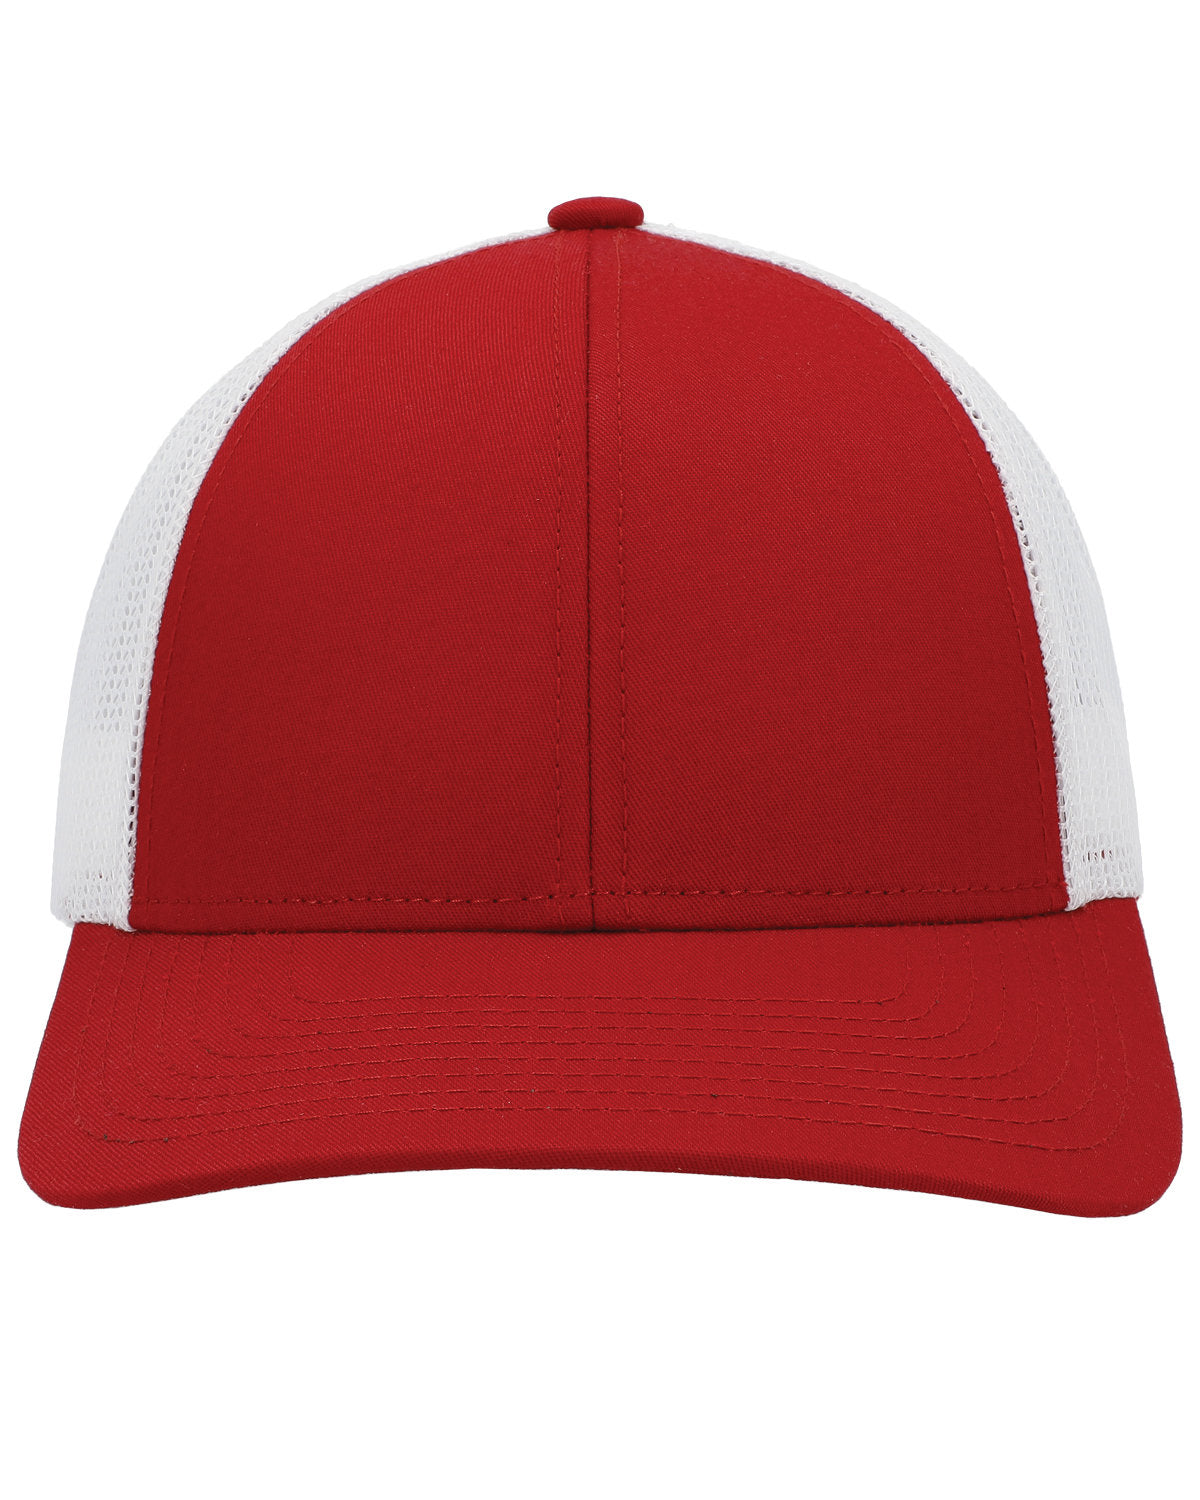 P114-PacificHeadwear-52-RED_WHITE_RED-OS